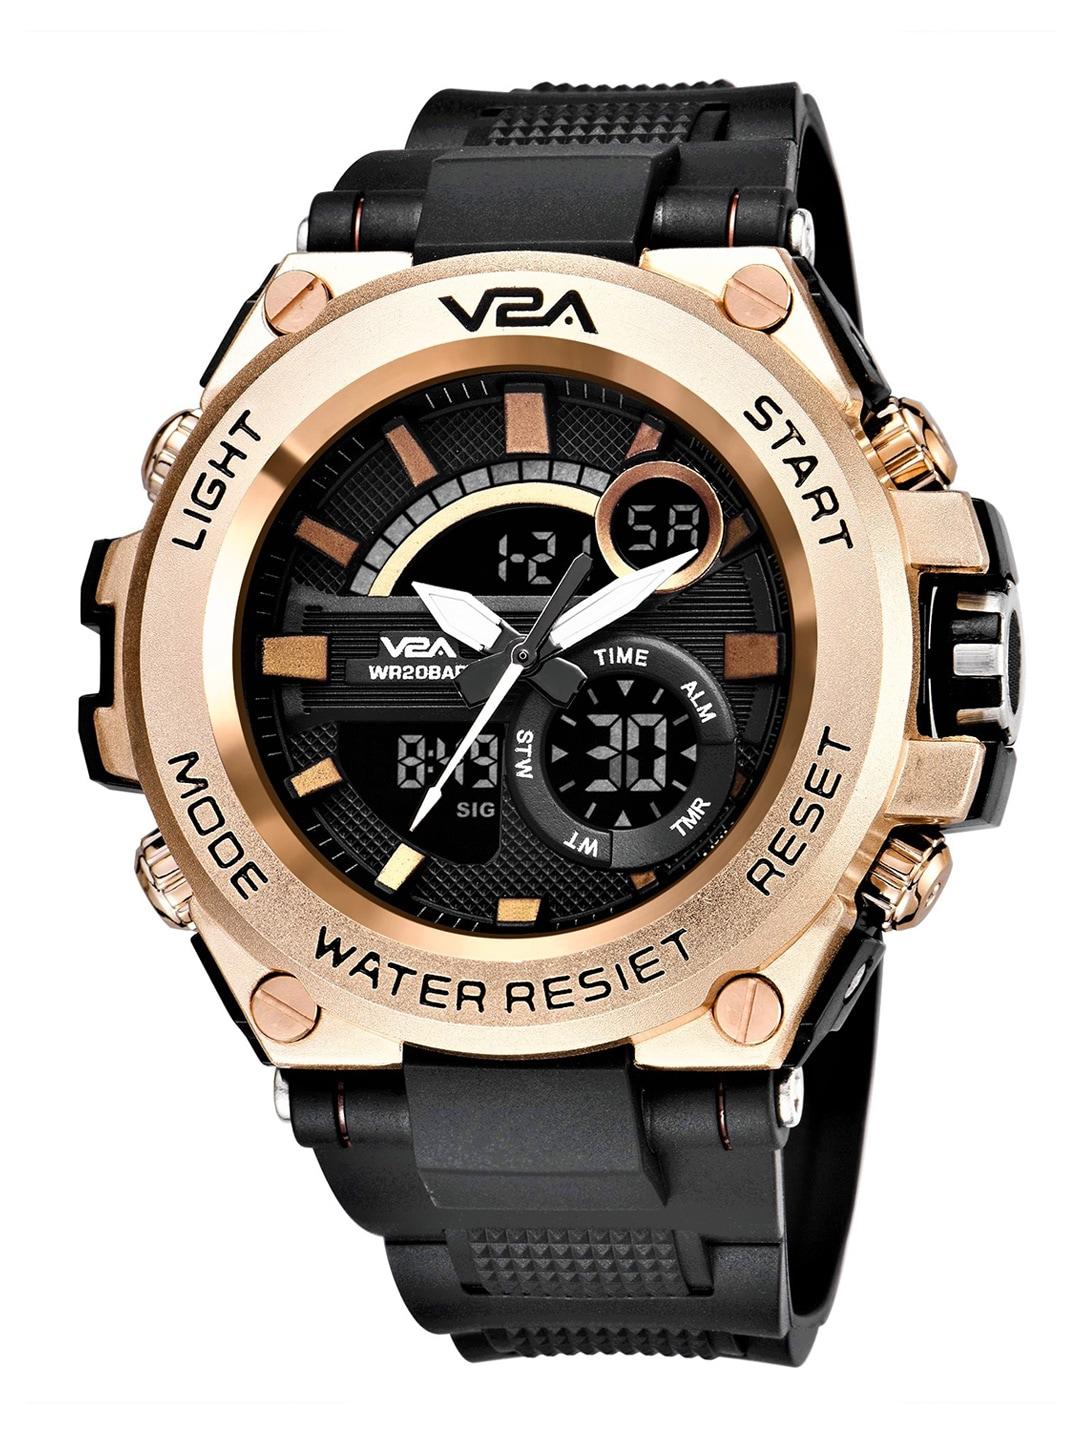 v2a-men-rose-gold-toned-patterned-dial-&-black-textured-straps-analogue-multi-function-watch